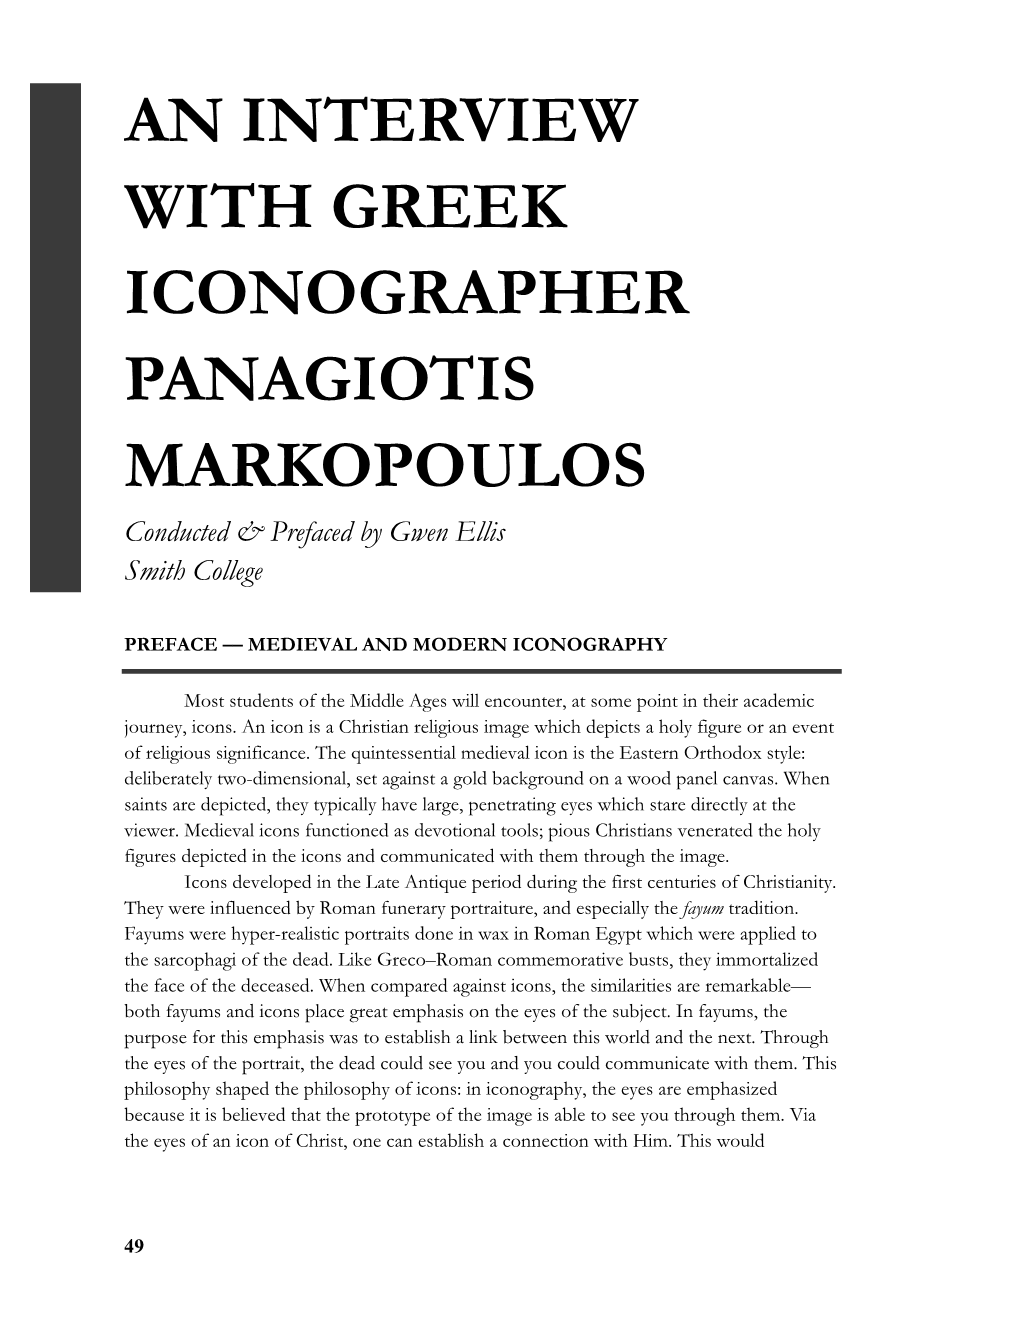 AN INTERVIEW with GREEK ICONOGRAPHER PANAGIOTIS MARKOPOULOS Conducted & Prefaced by Gwen Ellis Smith College